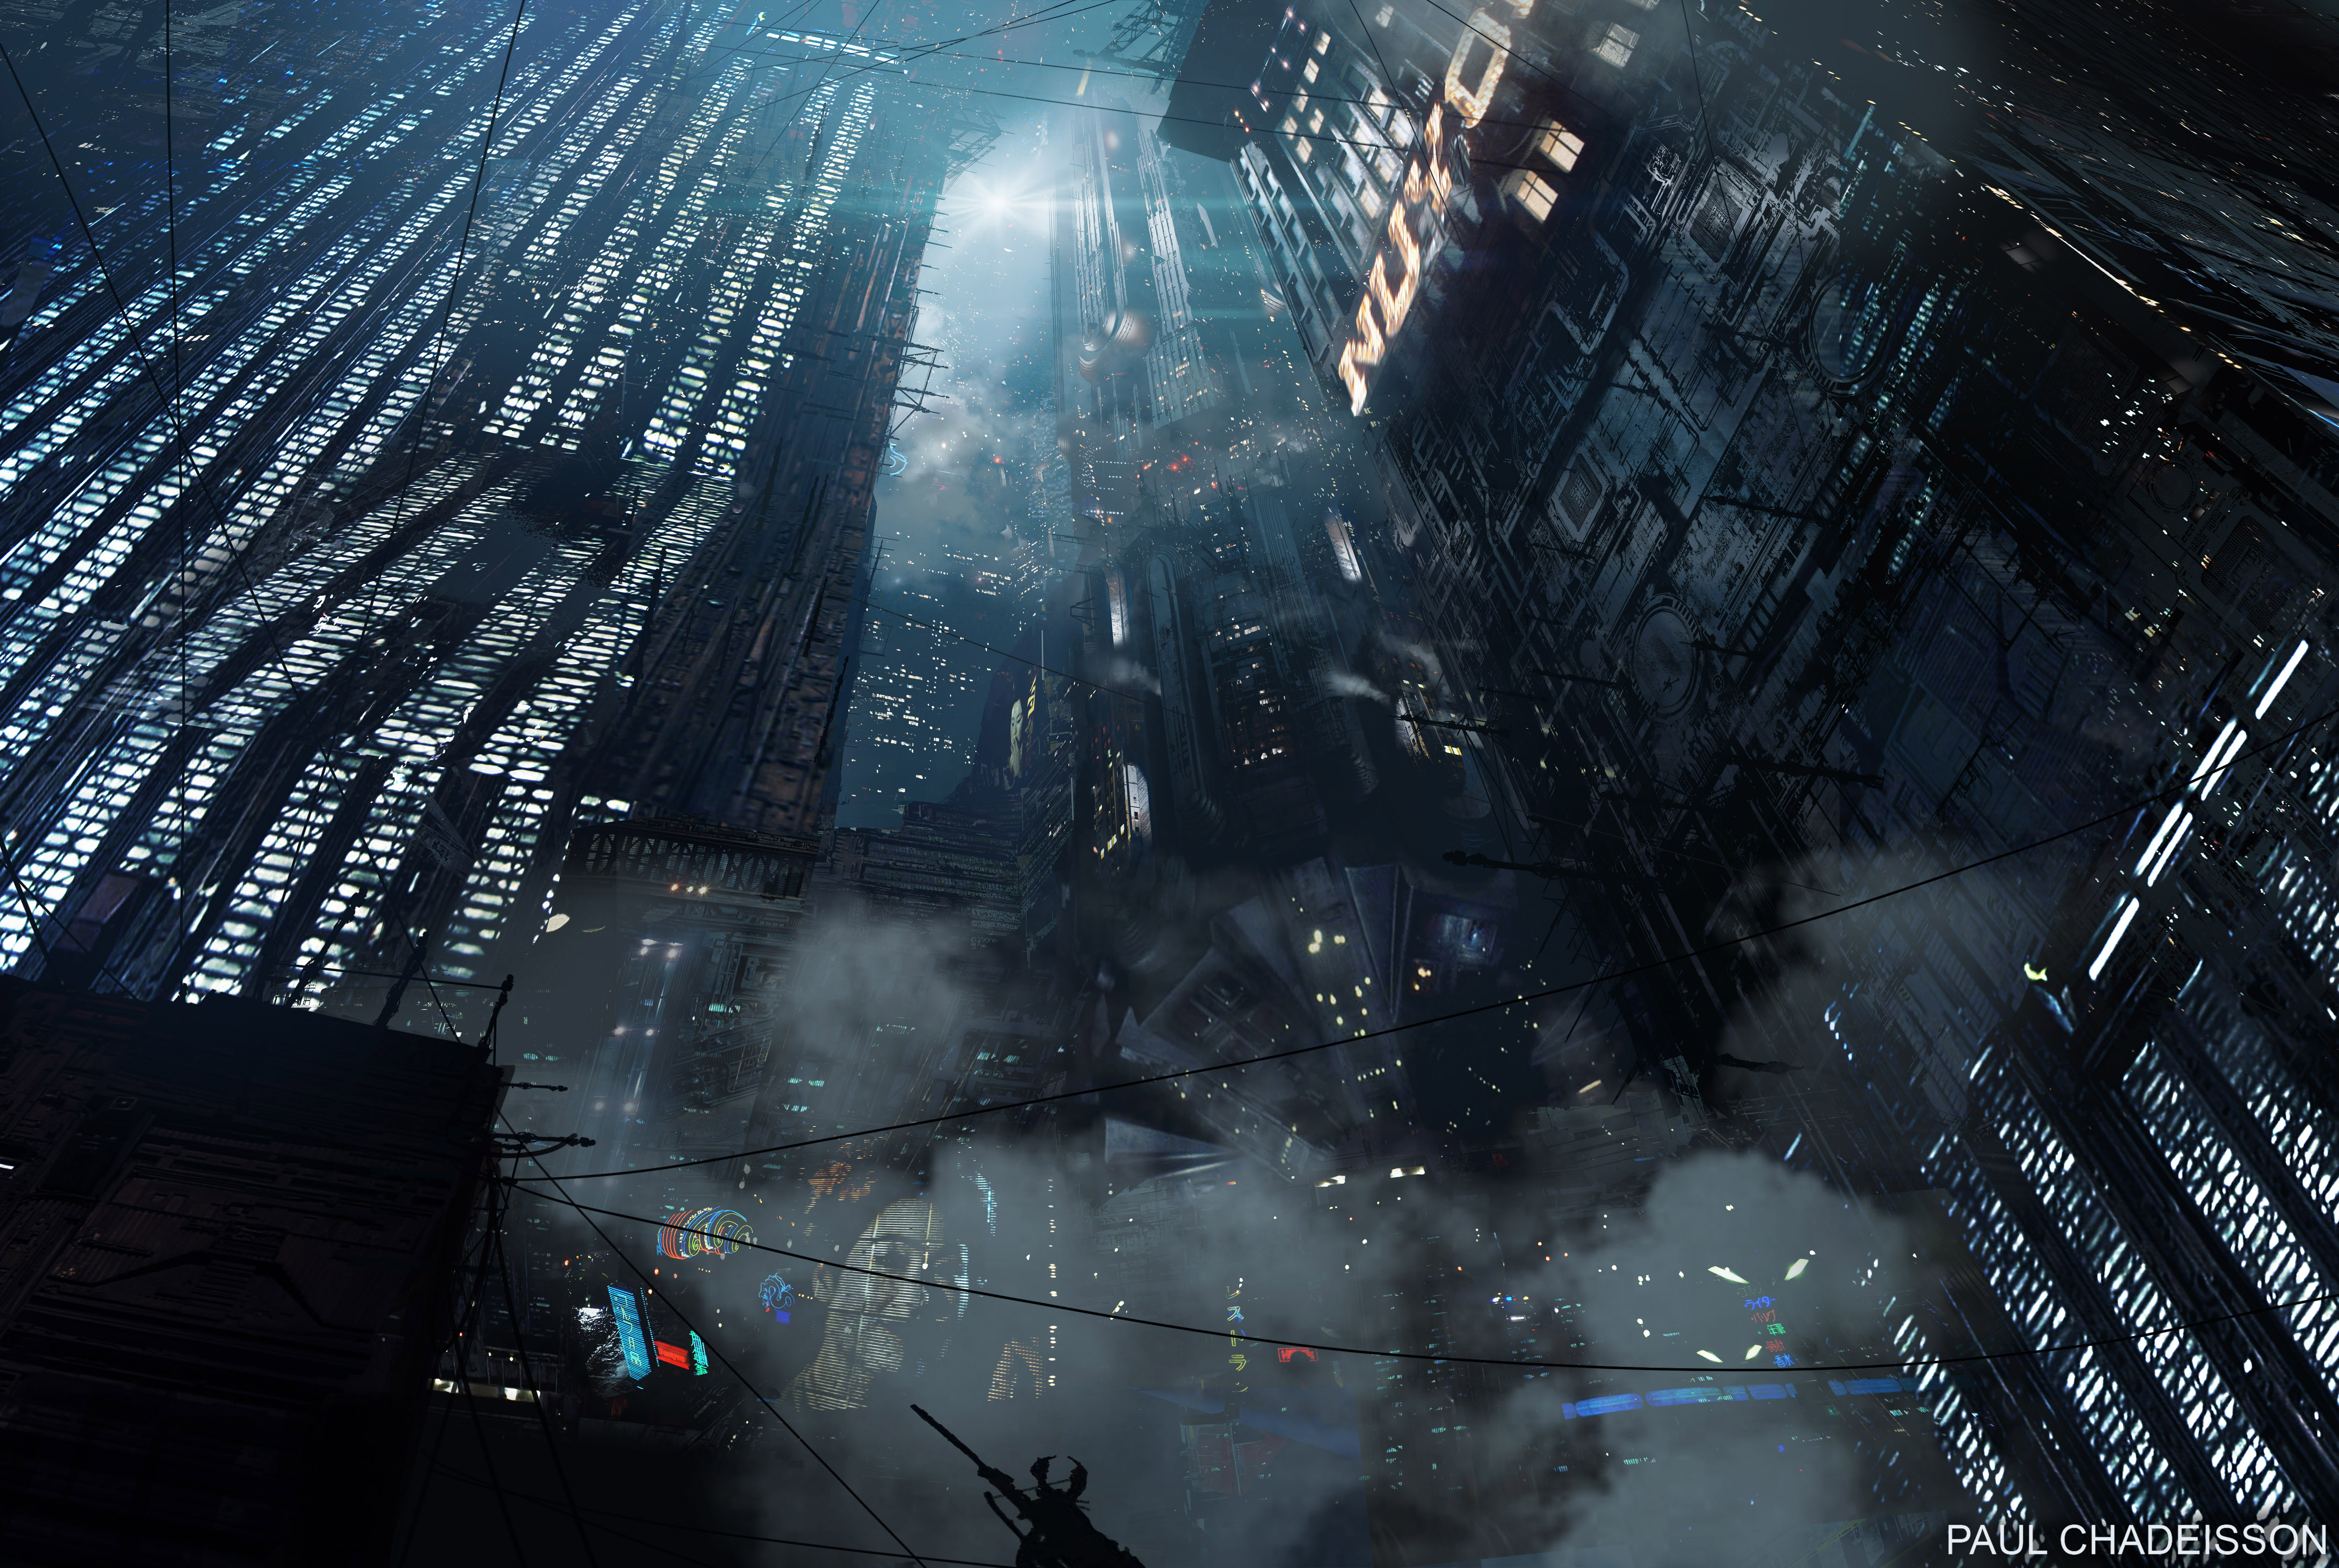 General 5000x3352 Blade Runner 2049 movies futuristic skyscraper science fiction watermarked